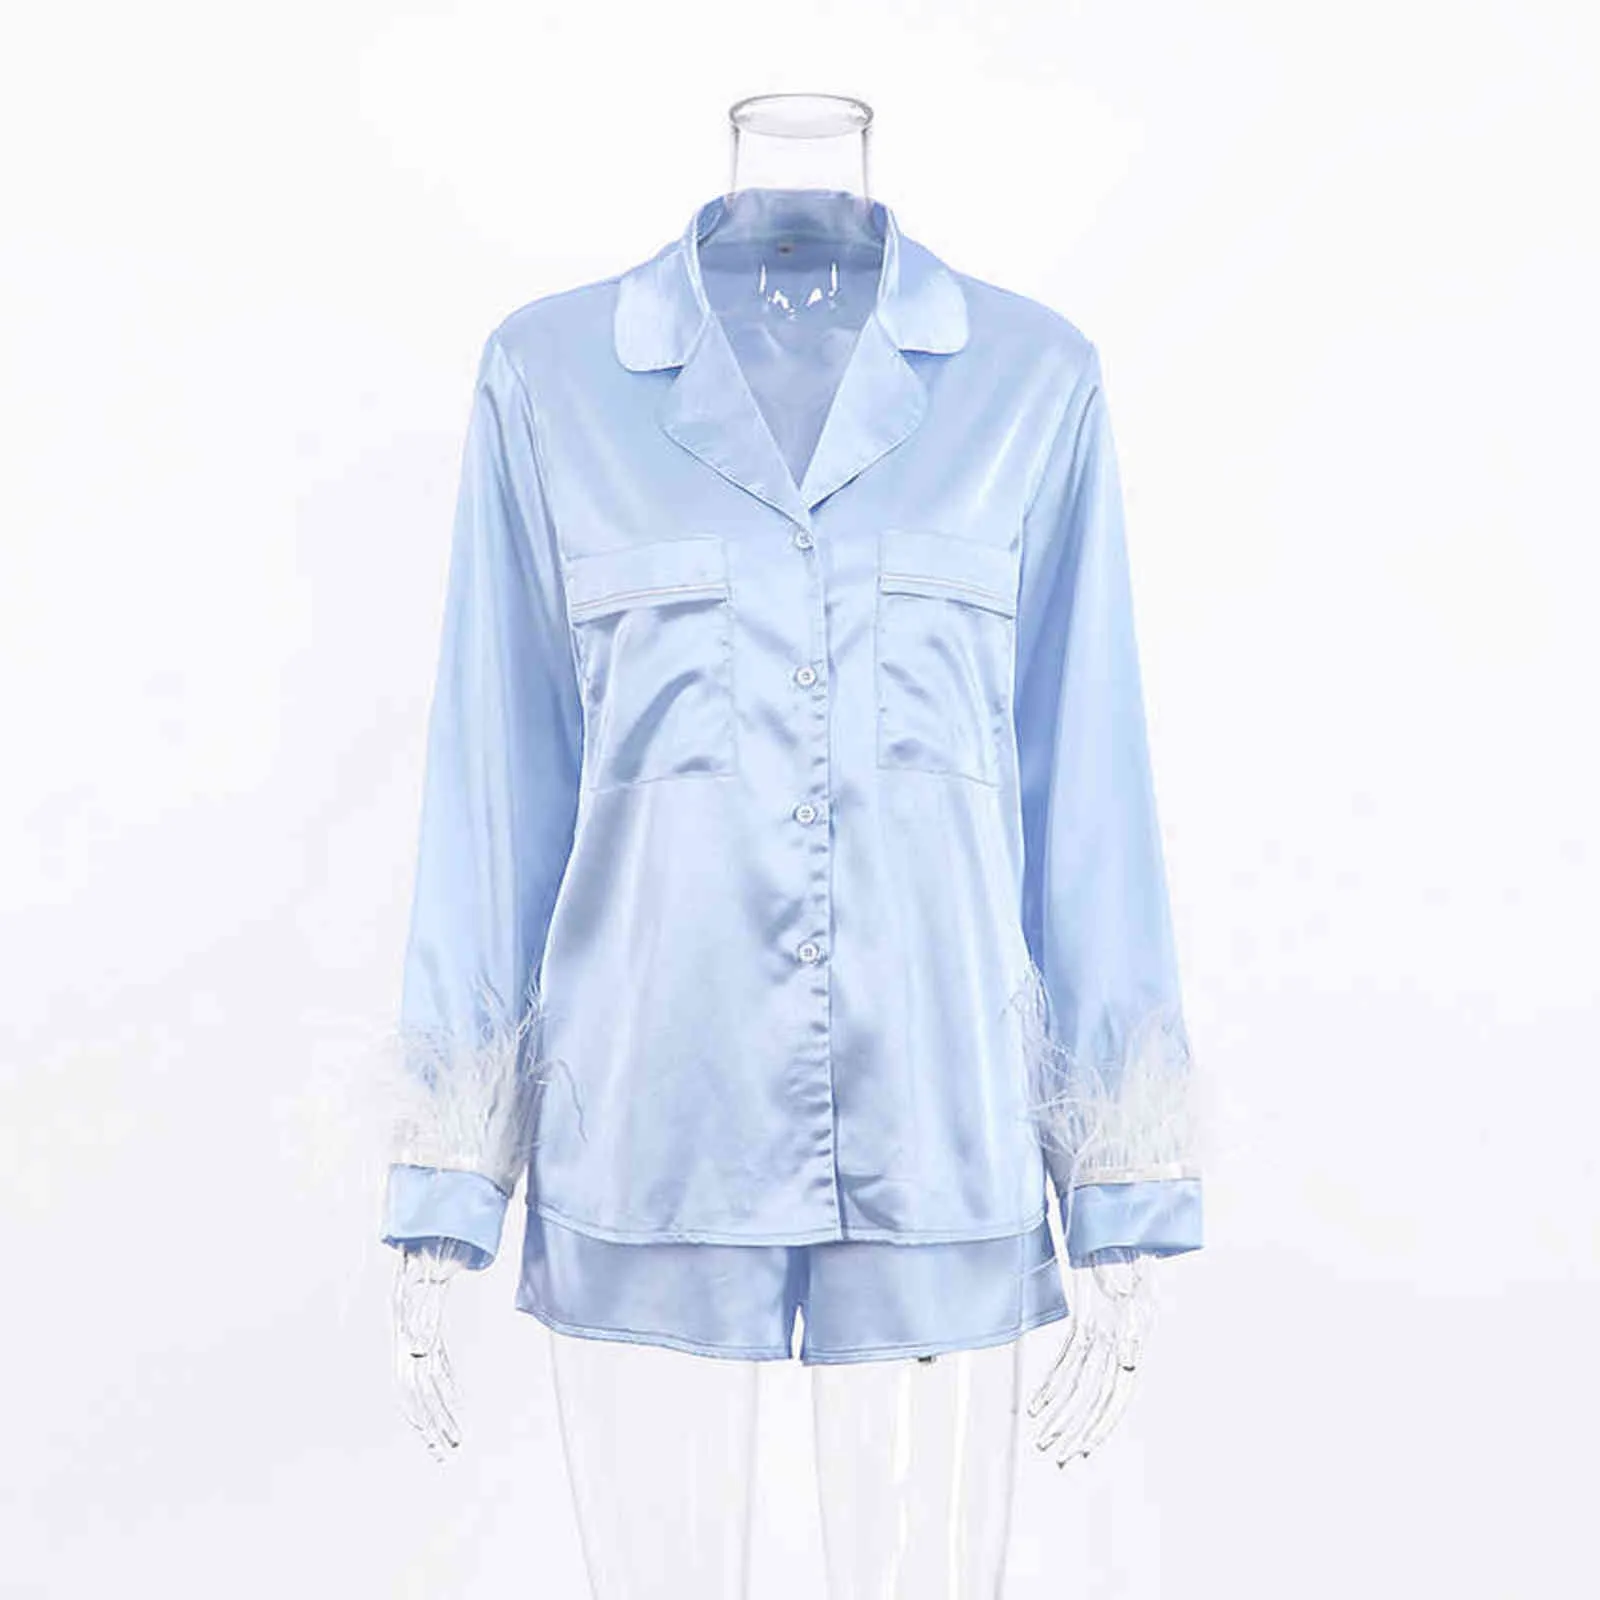 Restve Feathers Pajamas Women Set Long Sleeve Turn Down Collar Top Pockets Autumn Casual Night Suits With Shorts Satin 211112